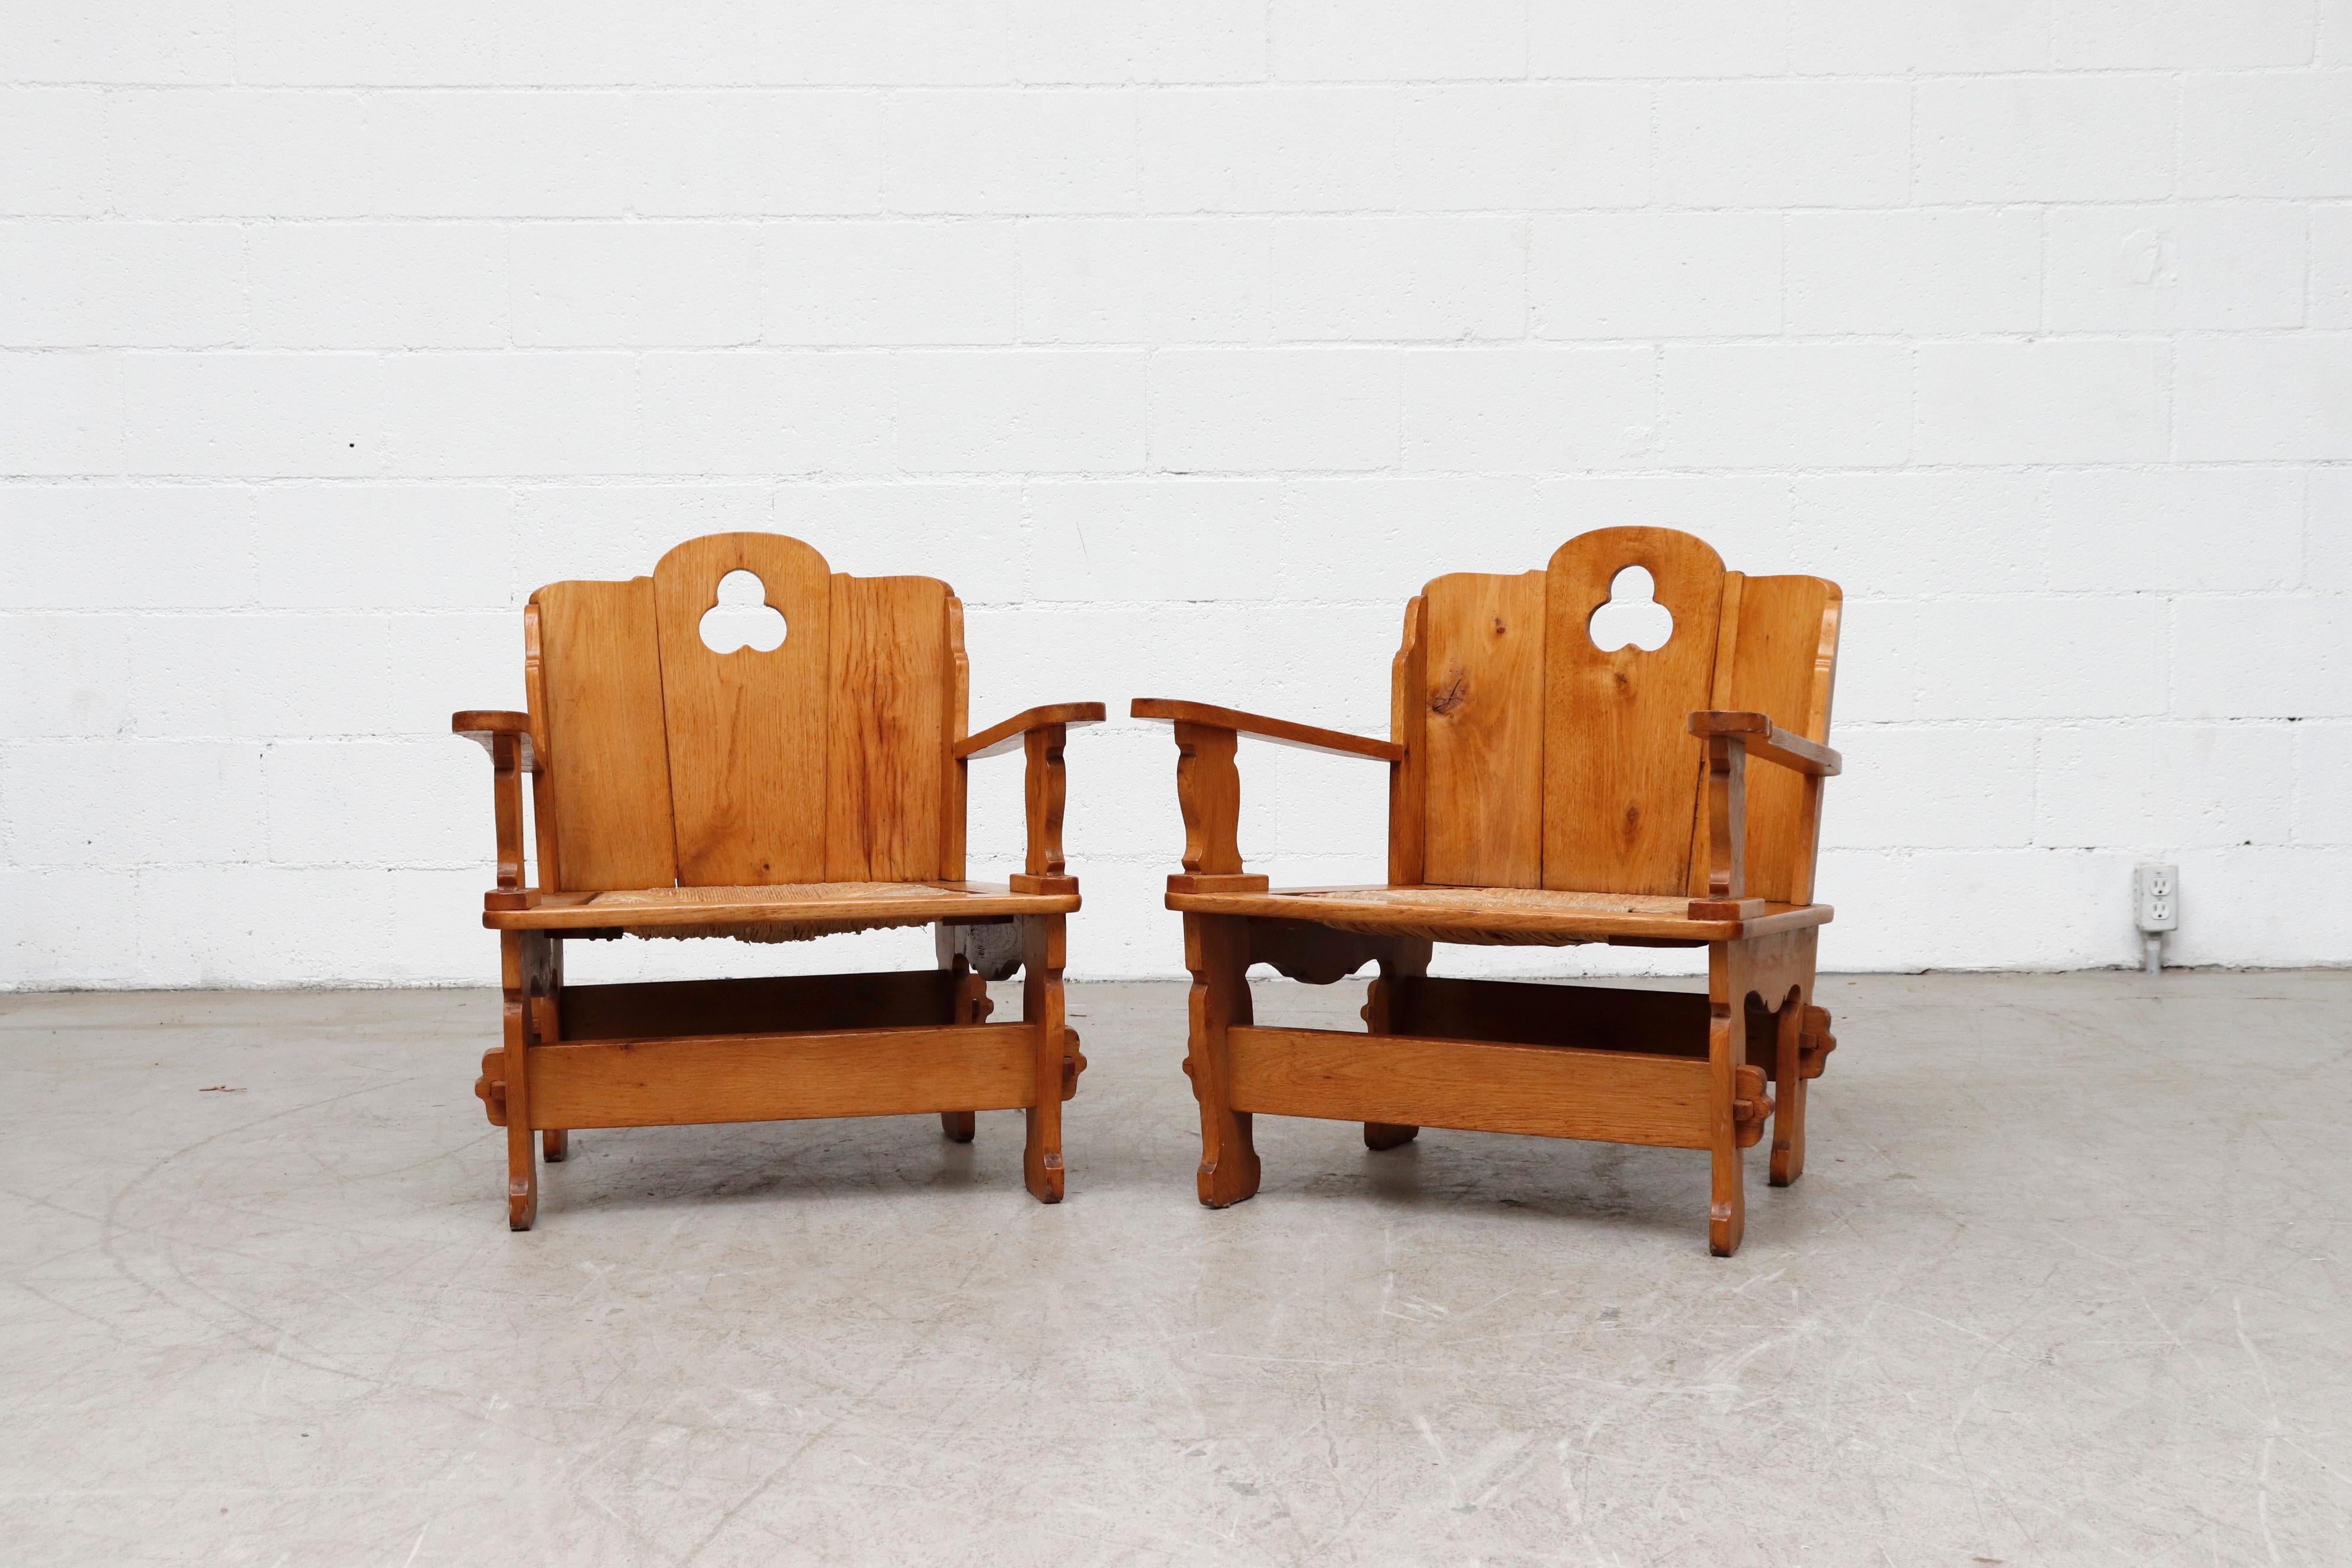 Beautiful Dutch midcentury Dutch country pine throne chairs with inset rush seat, tension peg construction and decorative cut-outs. In original condition with wear consistent with age and use. Set price.